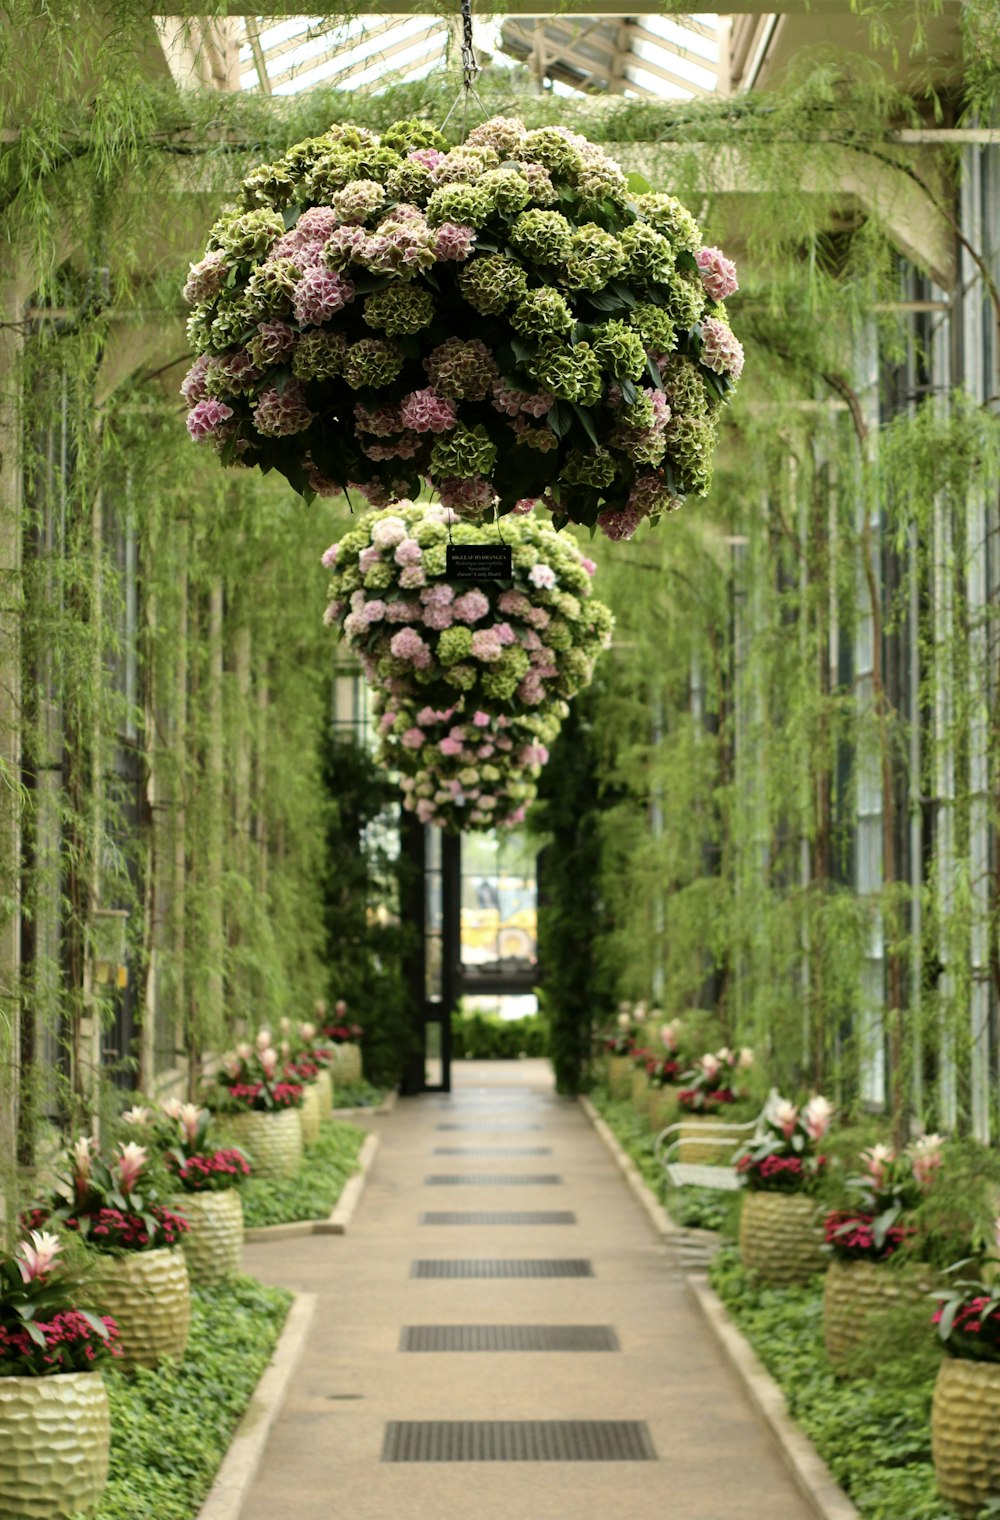 a walkway lined with potted plants and hanging baskets